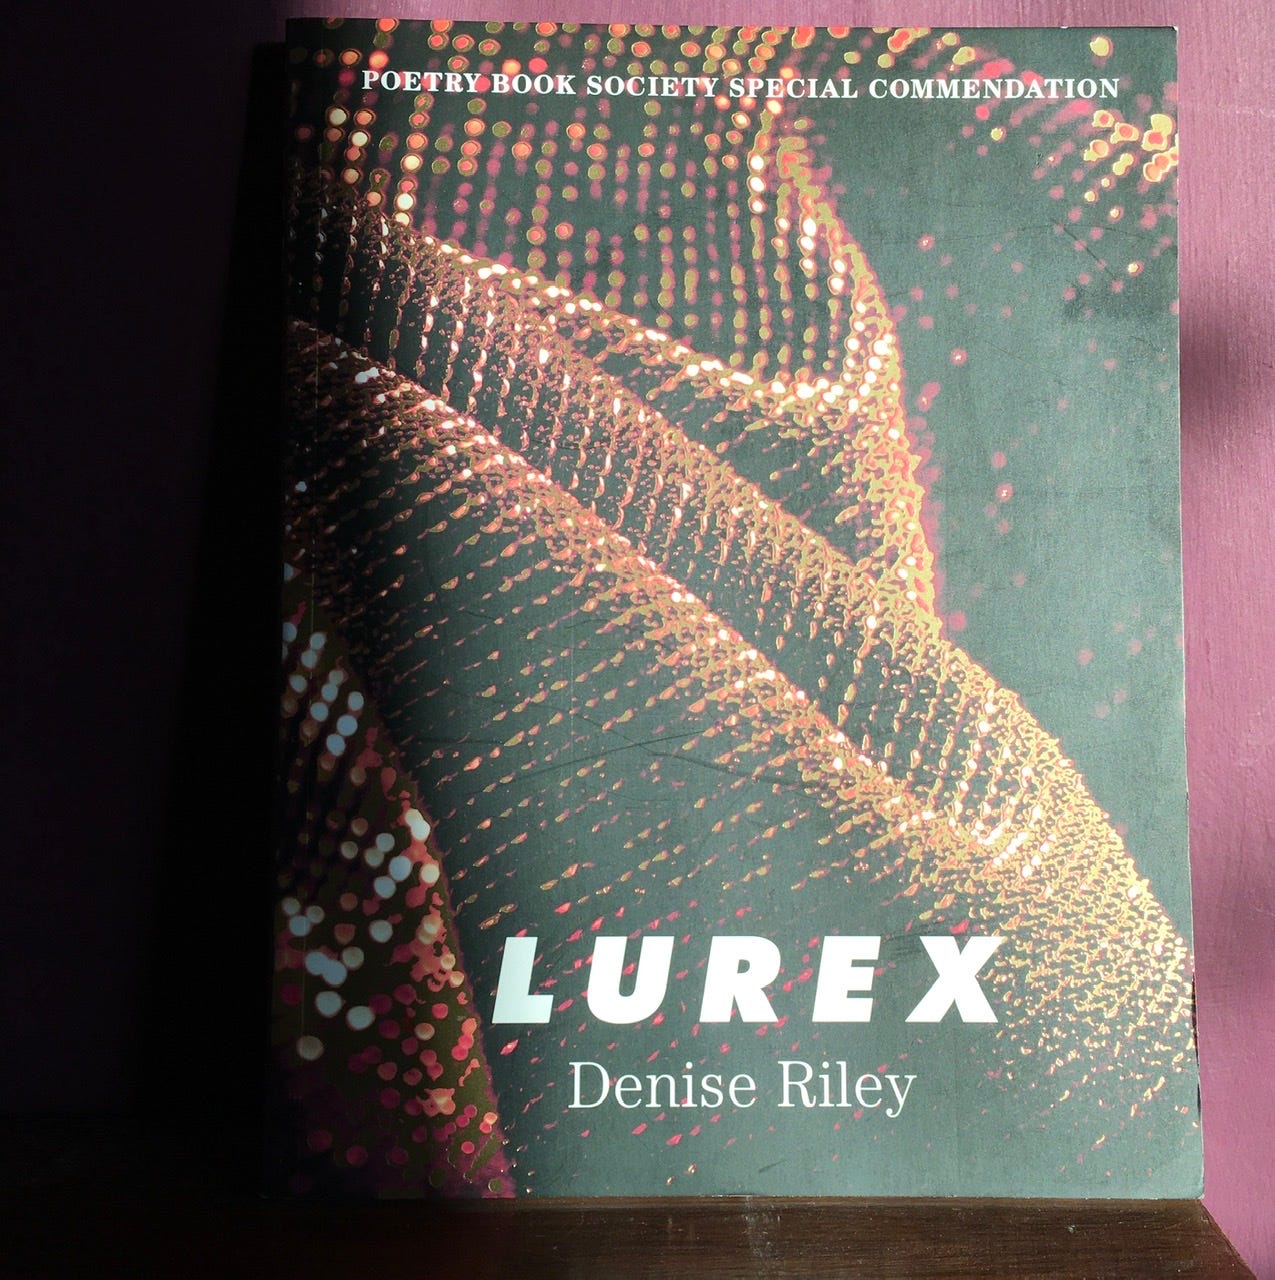 Photo of Denise Riley's book Lurex